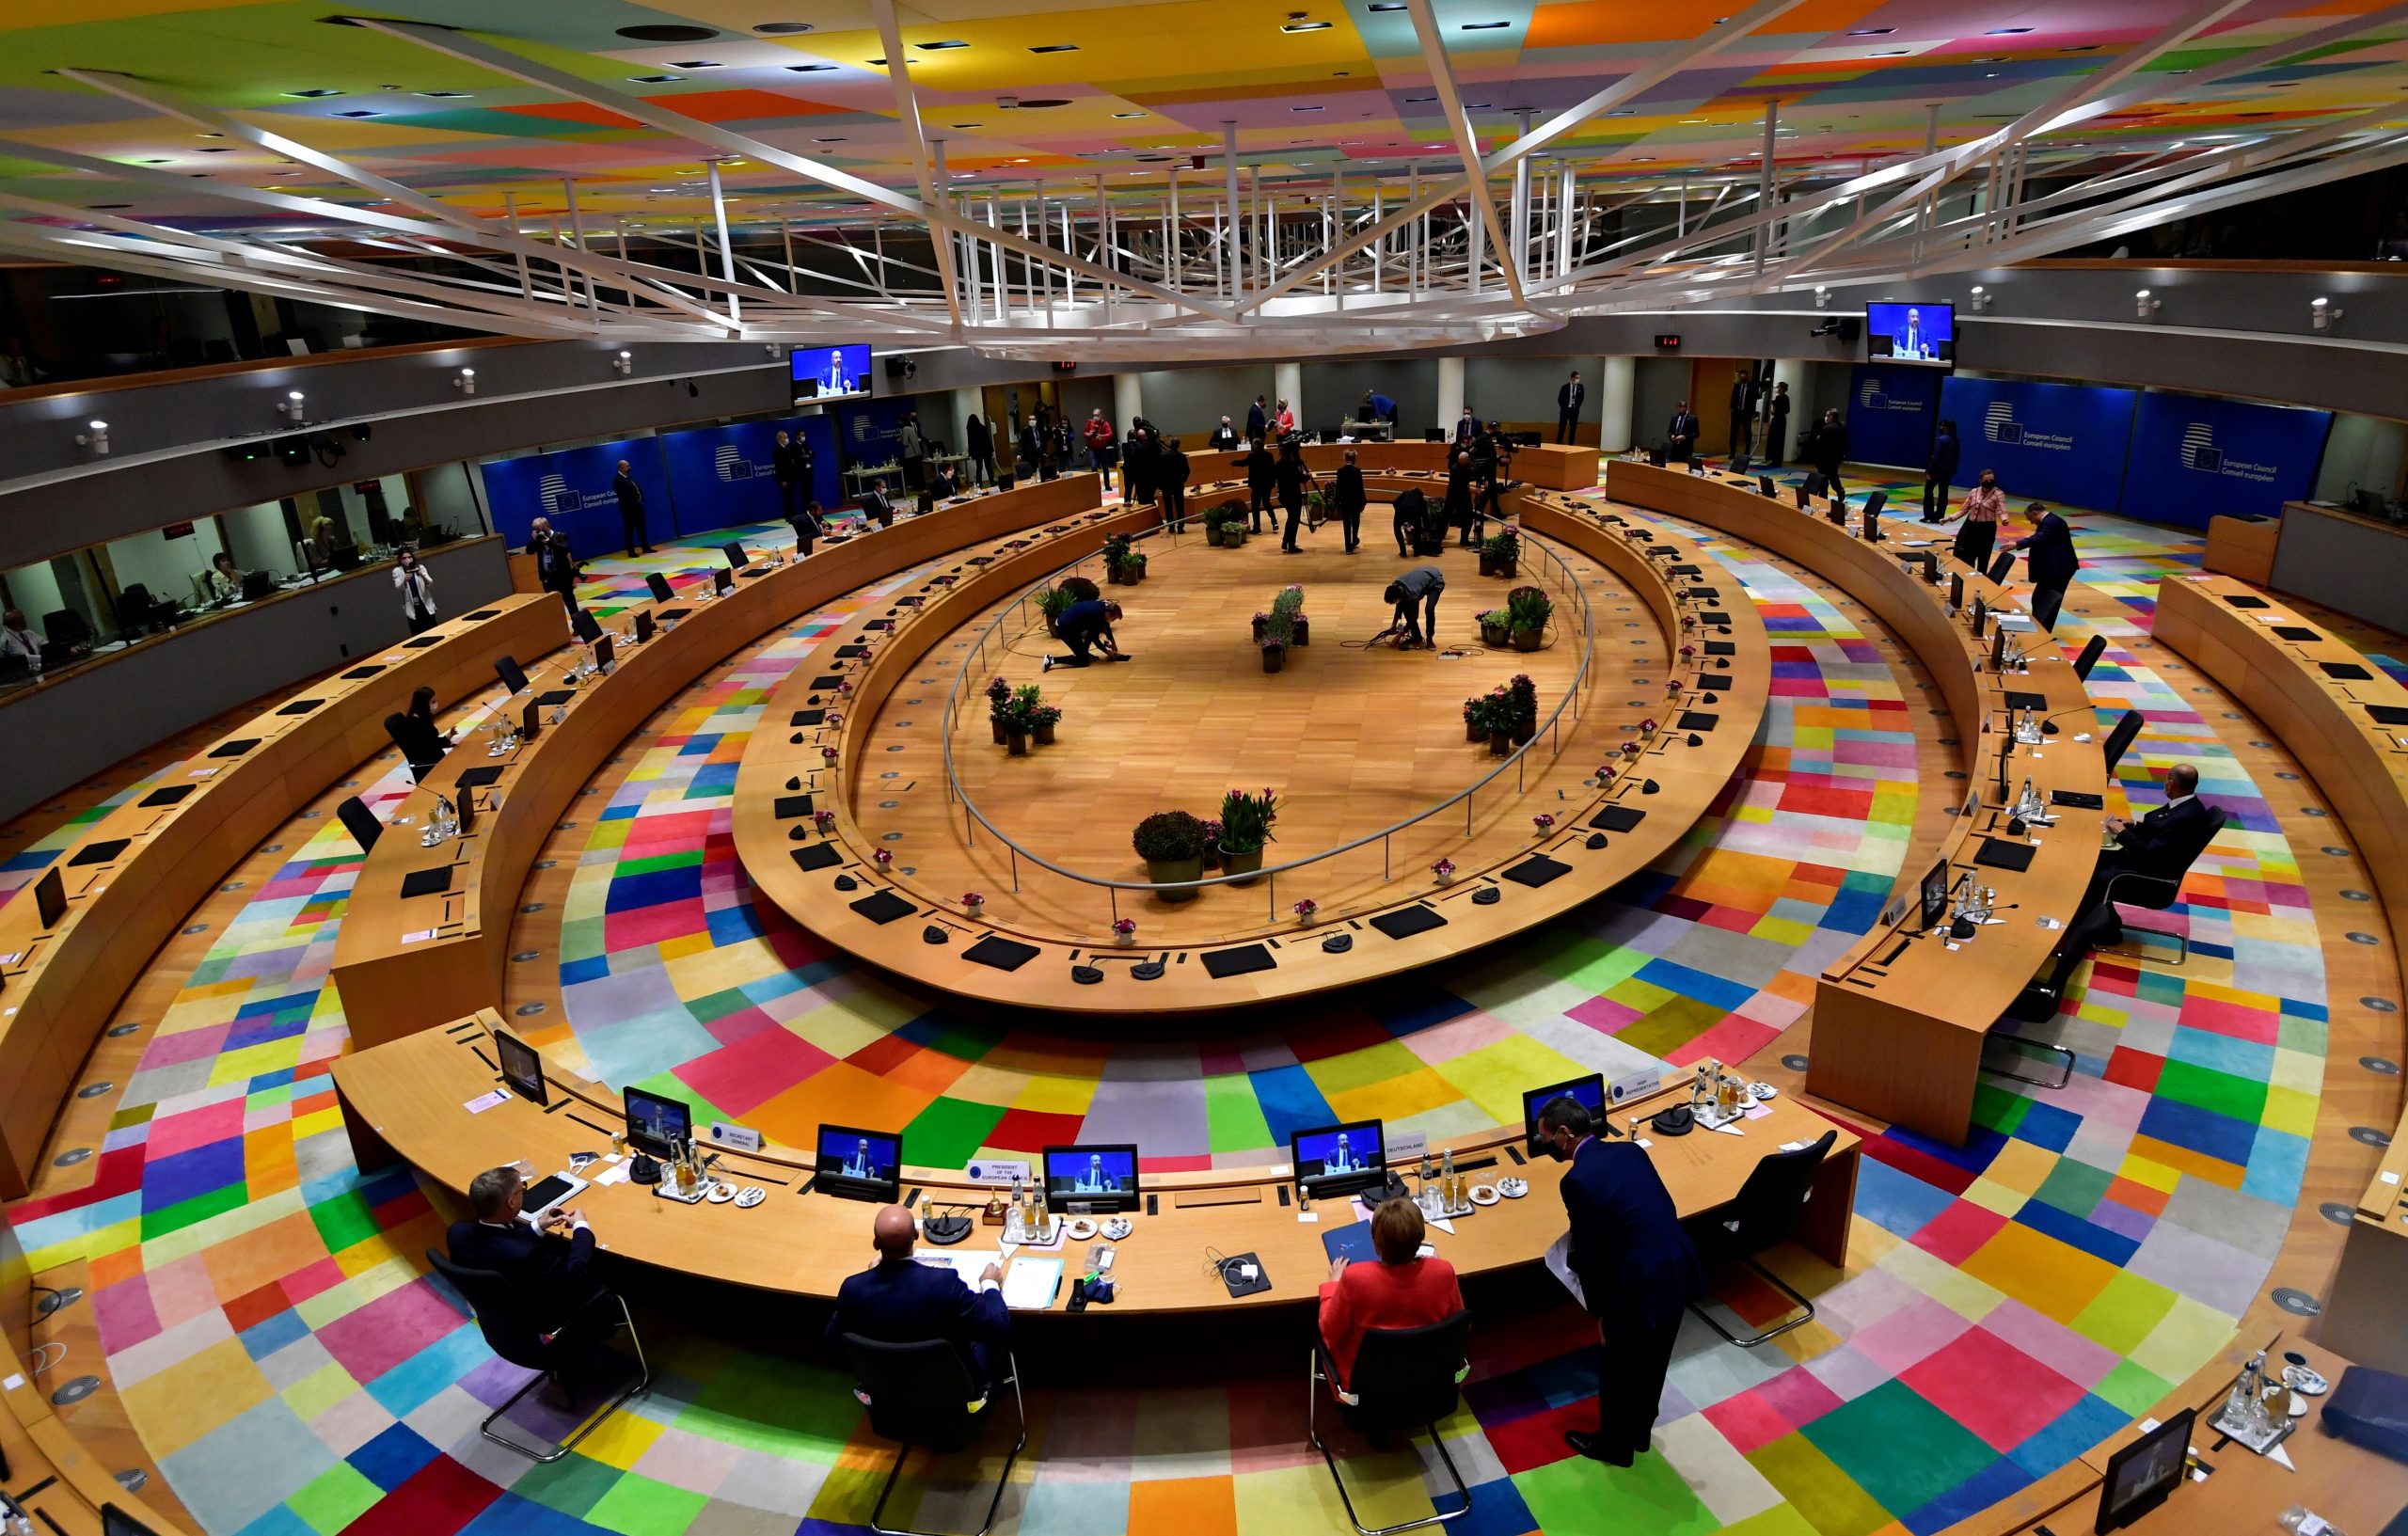 EU leaders summit in Brussels A general view shows preparations ahead of a roundtable meeting during the second face-to-face European Union summit since the coronavirus disease (COVID-19) outbreak, in Brussels, Belgium October 2, 2020. John Thys/Pool via REUTERS POOL